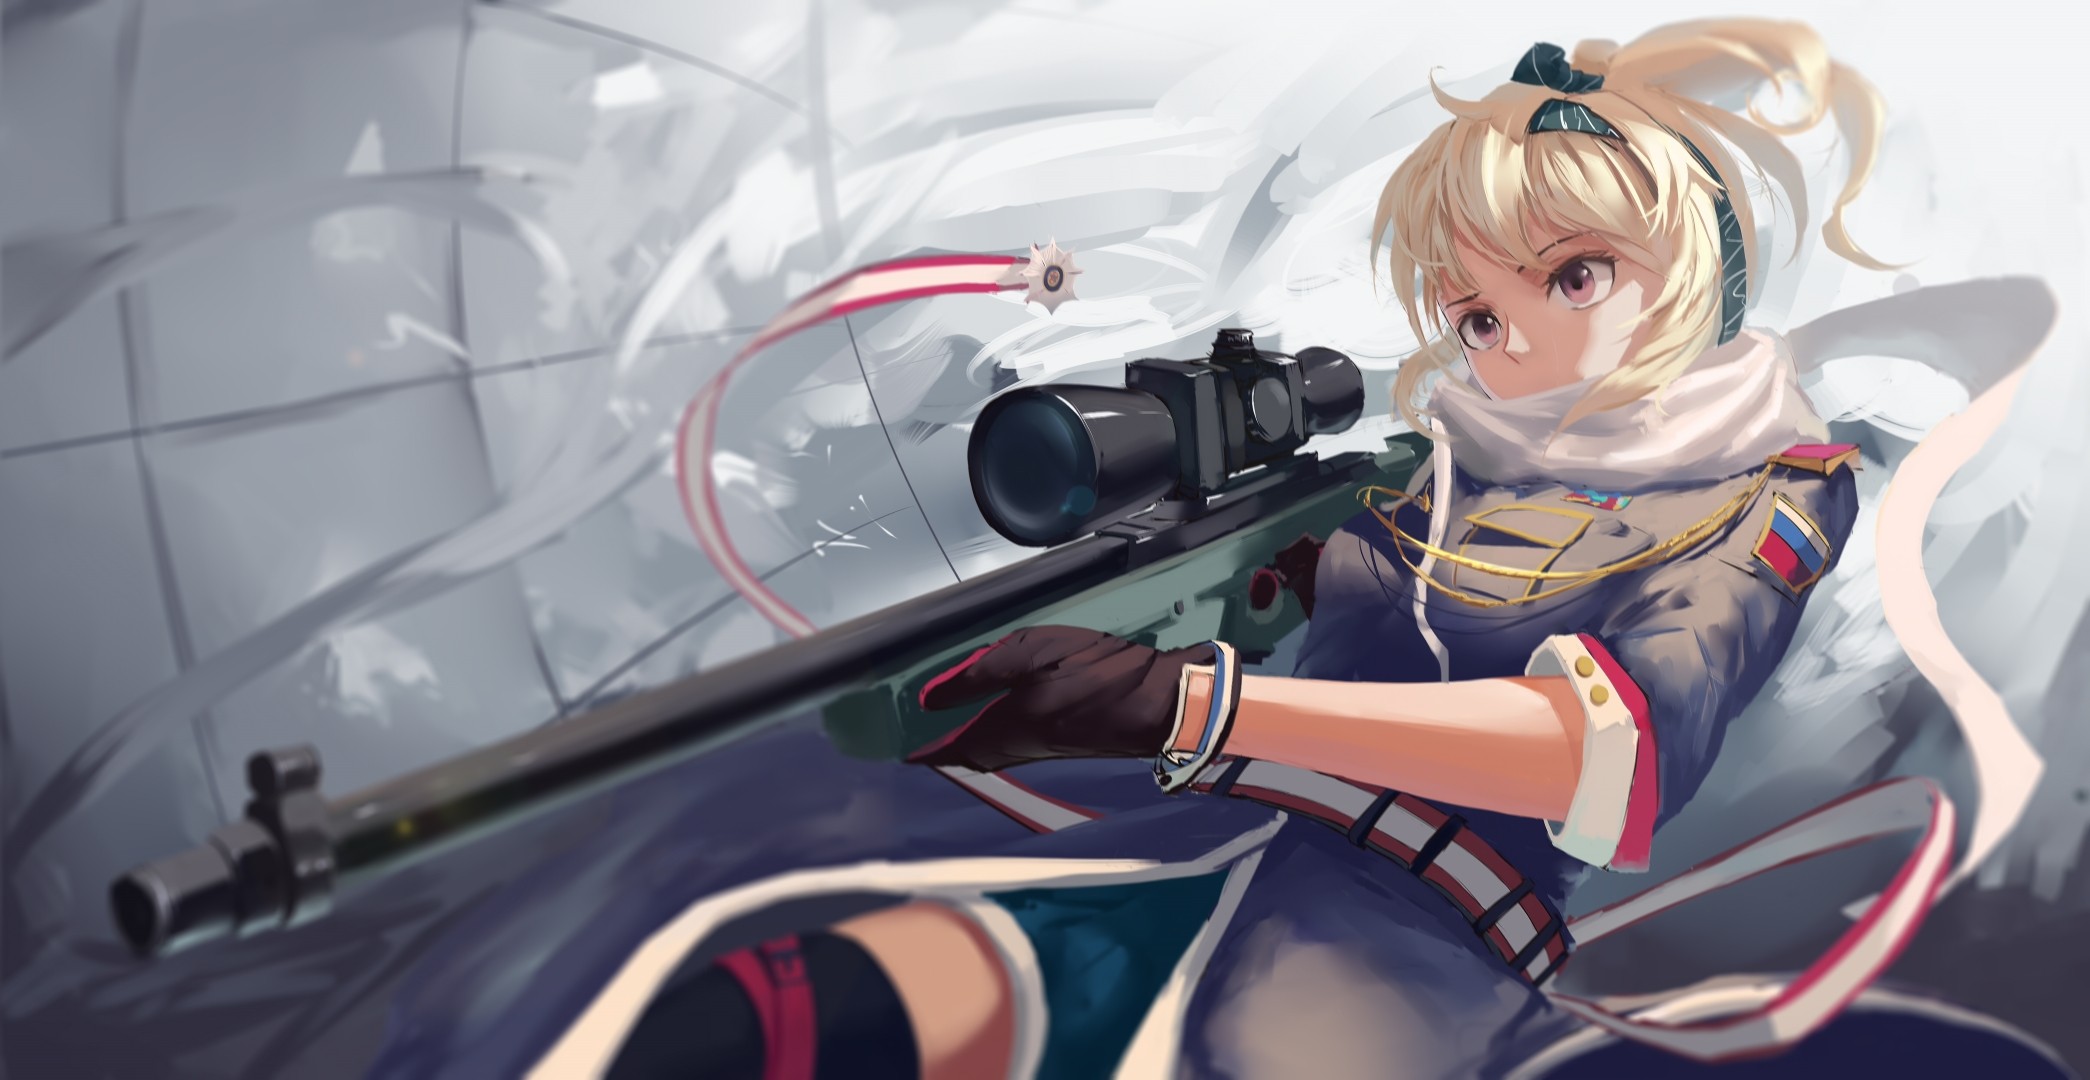 Anime Girl With Sniper - HD Wallpaper 